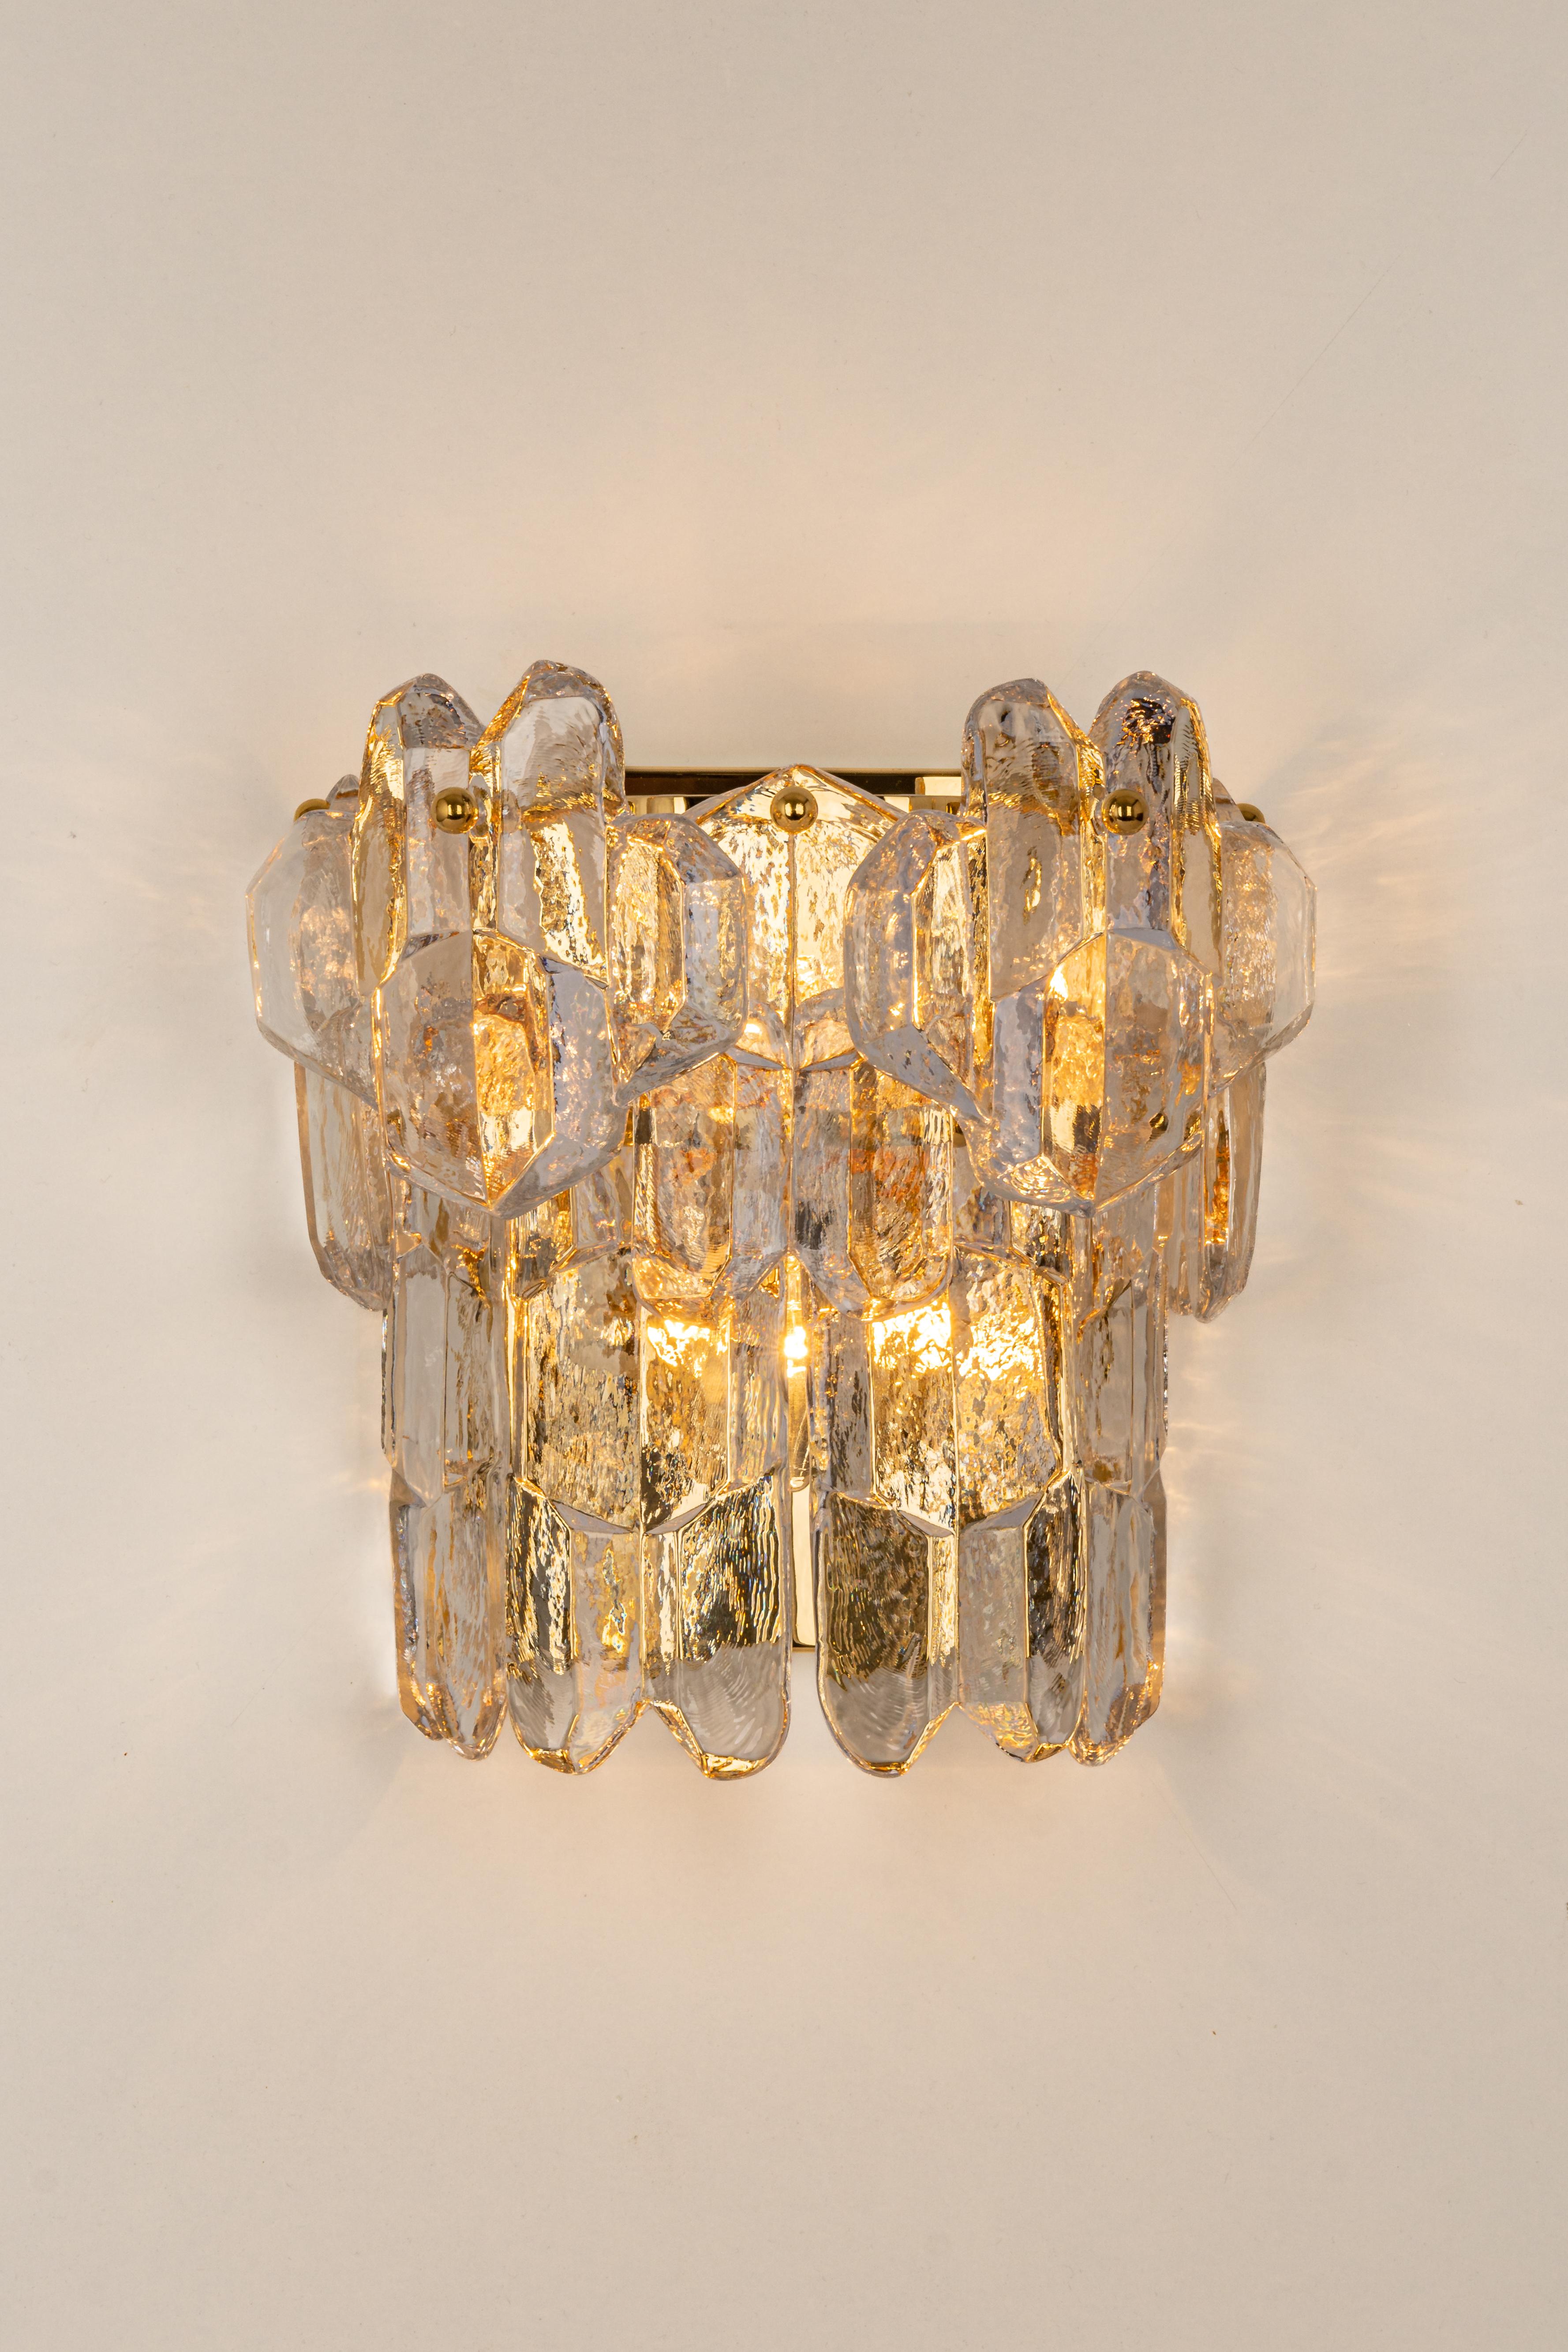 Murano Glass 1 of 2 Pairs of Large Kalmar Sconces Wall Lights 'Palazzo', Austria, 1970s For Sale